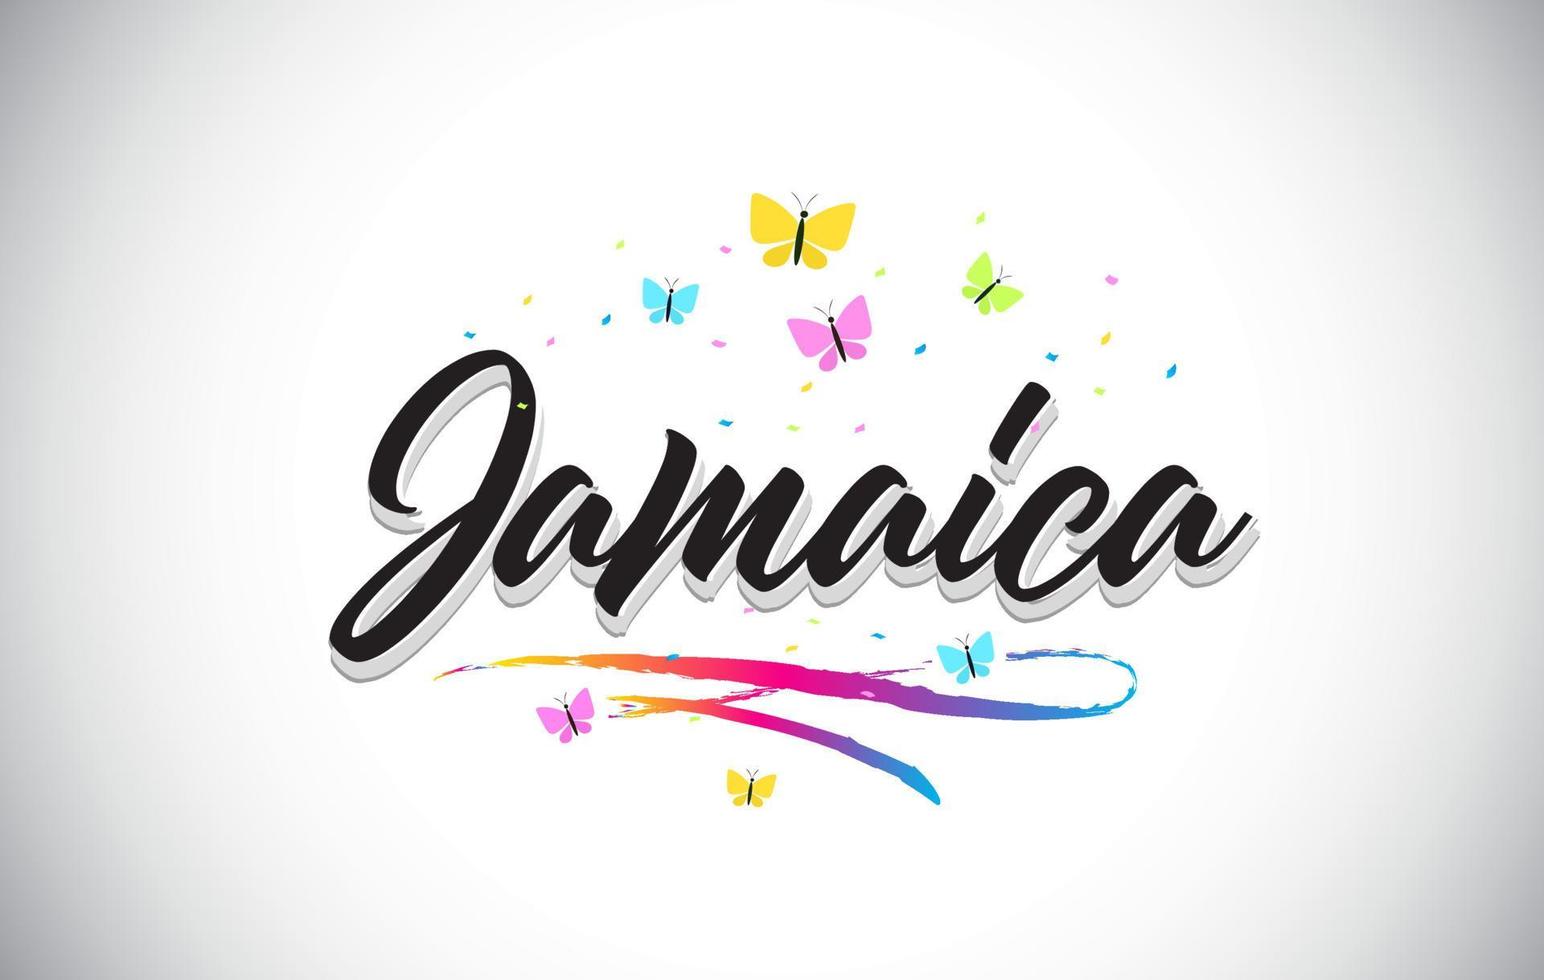 Jamaica Handwritten Vector Word Text with Butterflies and Colorful Swoosh.